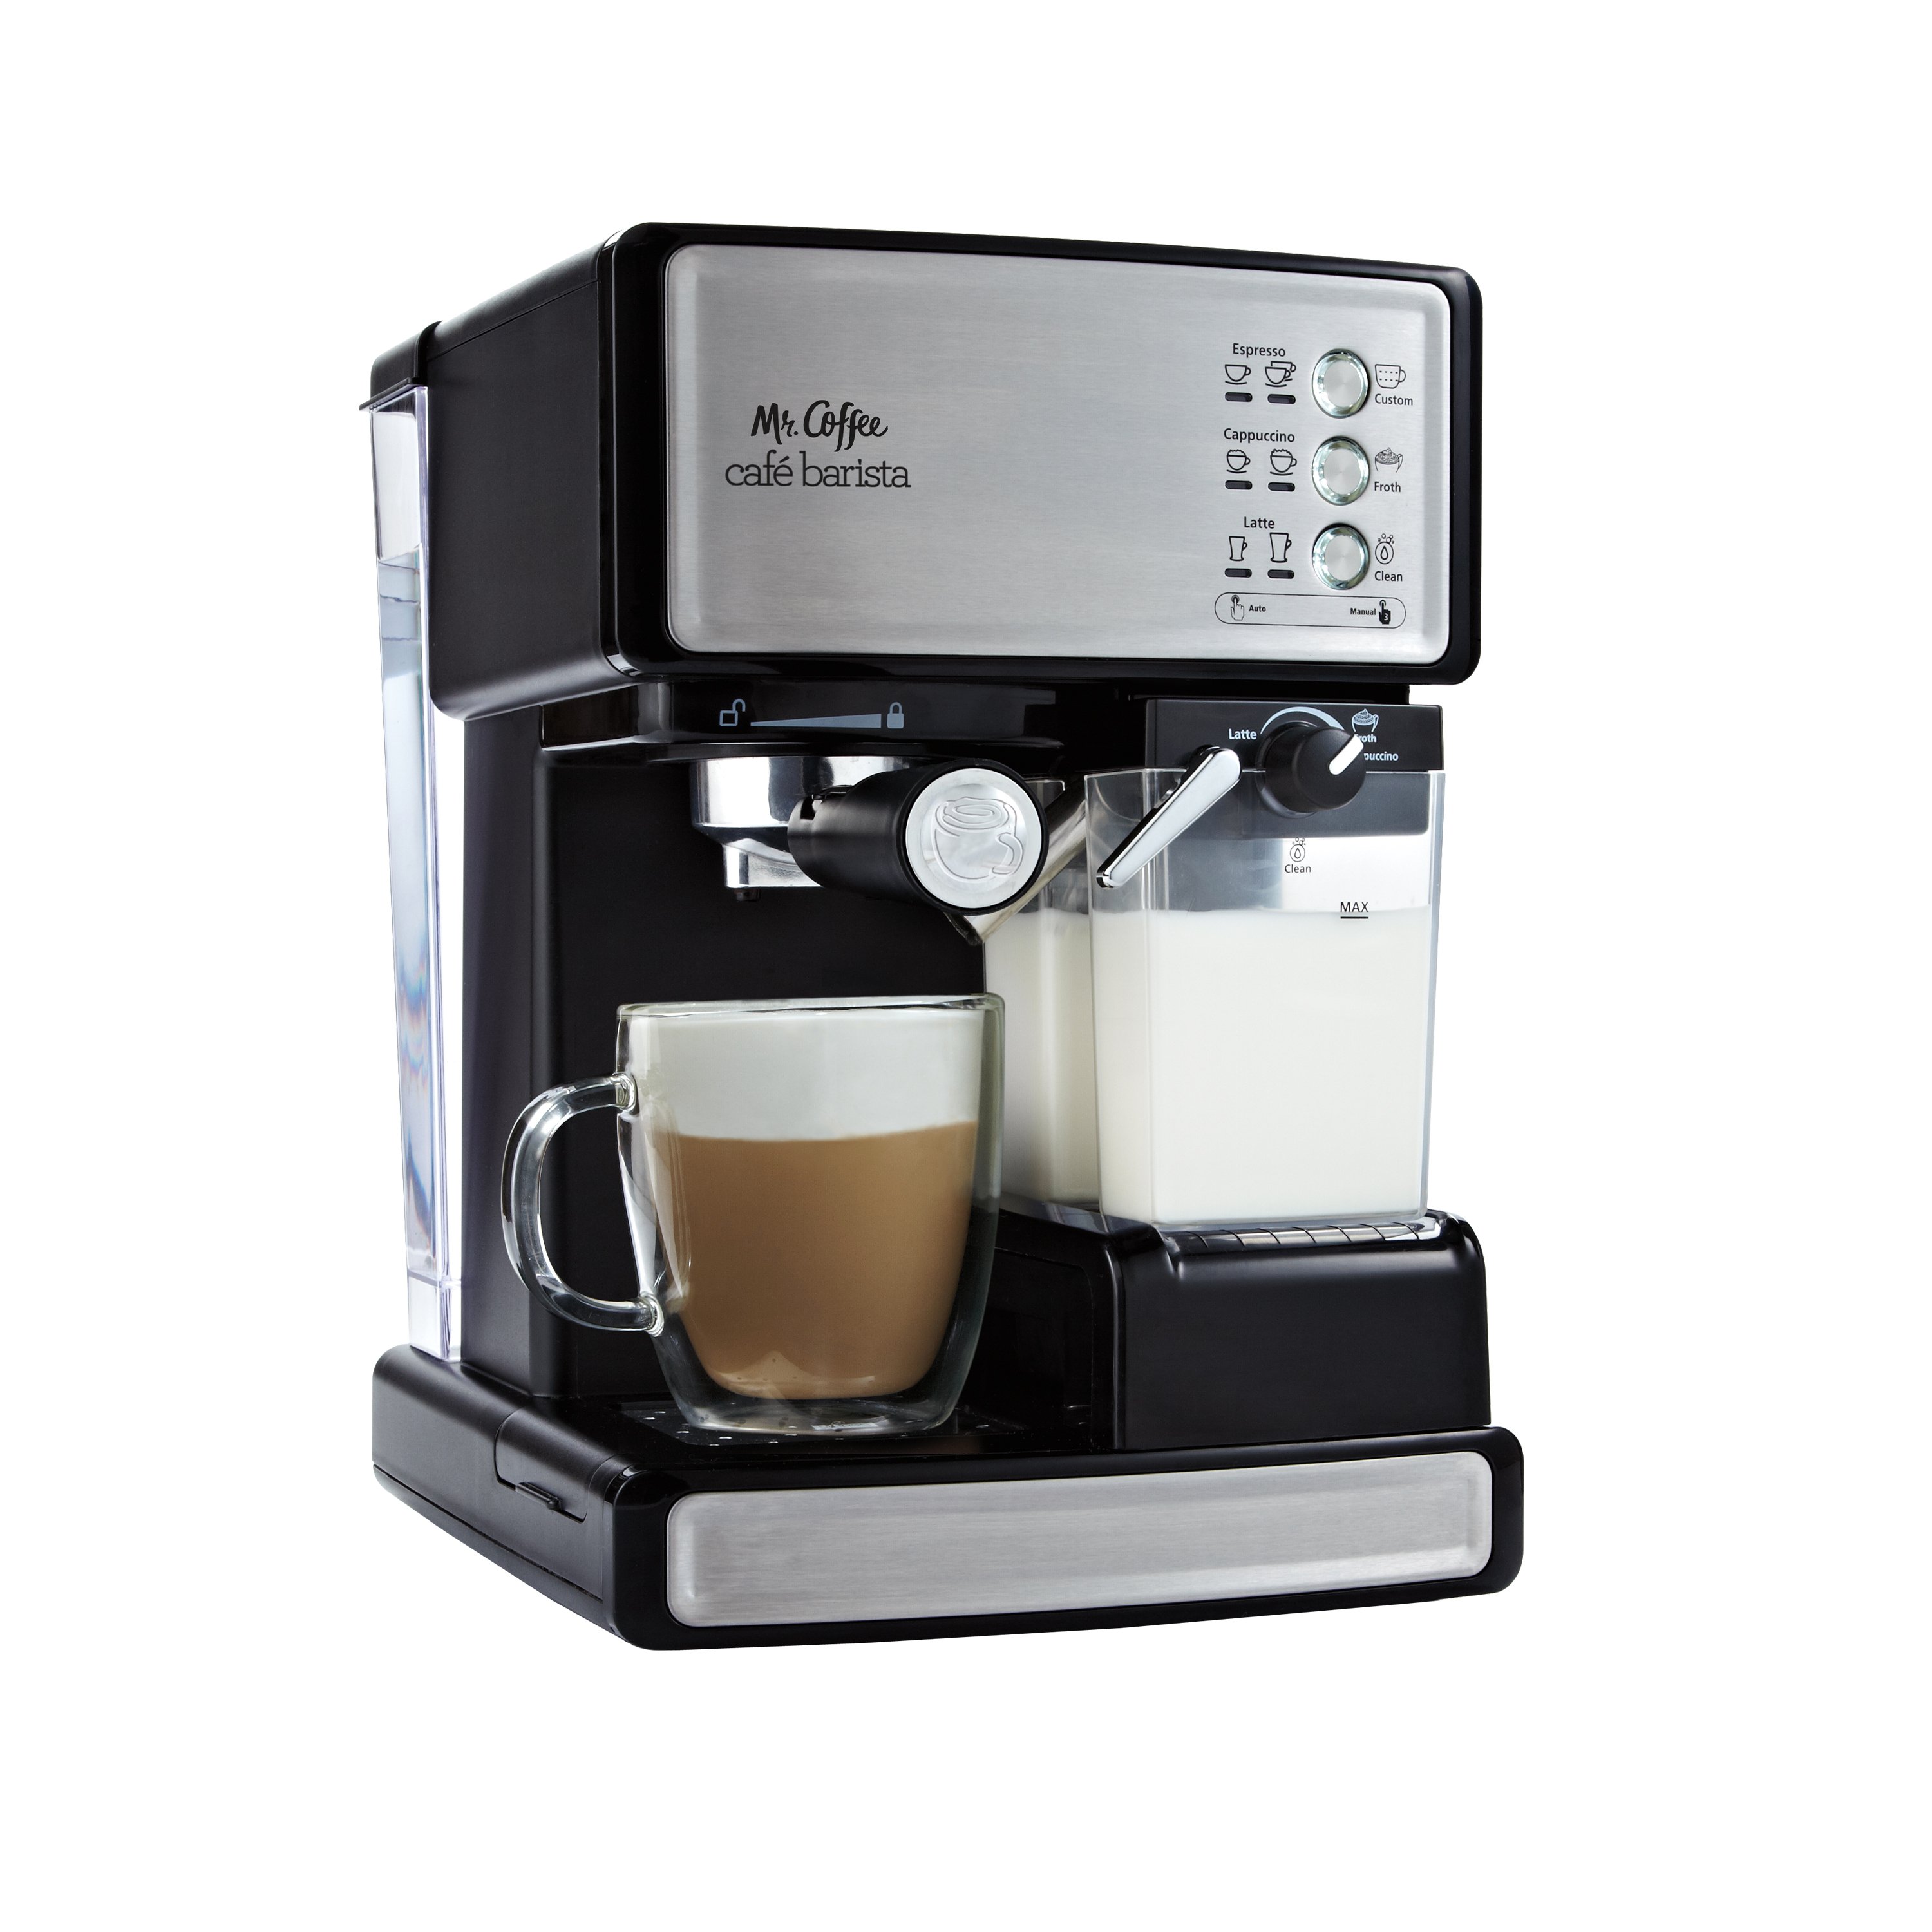 New Mr Coffee Steam Espresso Machine with Frothing Cappuccino Latte Nozzle Cafe 